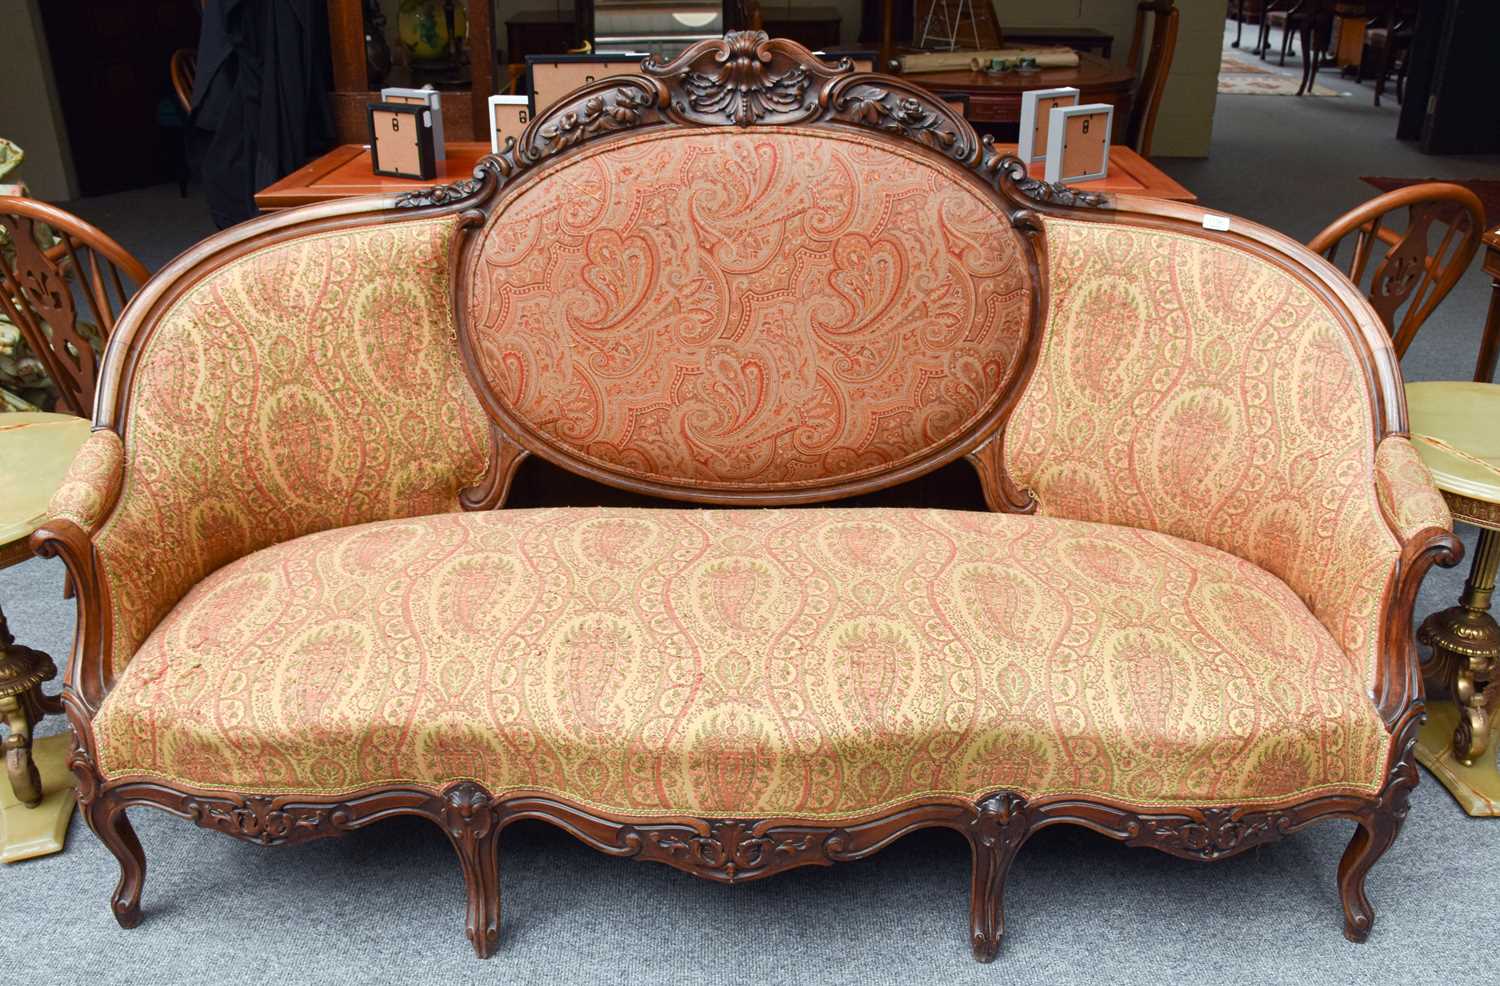 A Mid Victorian Carved Rosewood Settee Dimensions - 110cm by 180cm by 70cm Top section of carved - Image 2 of 2